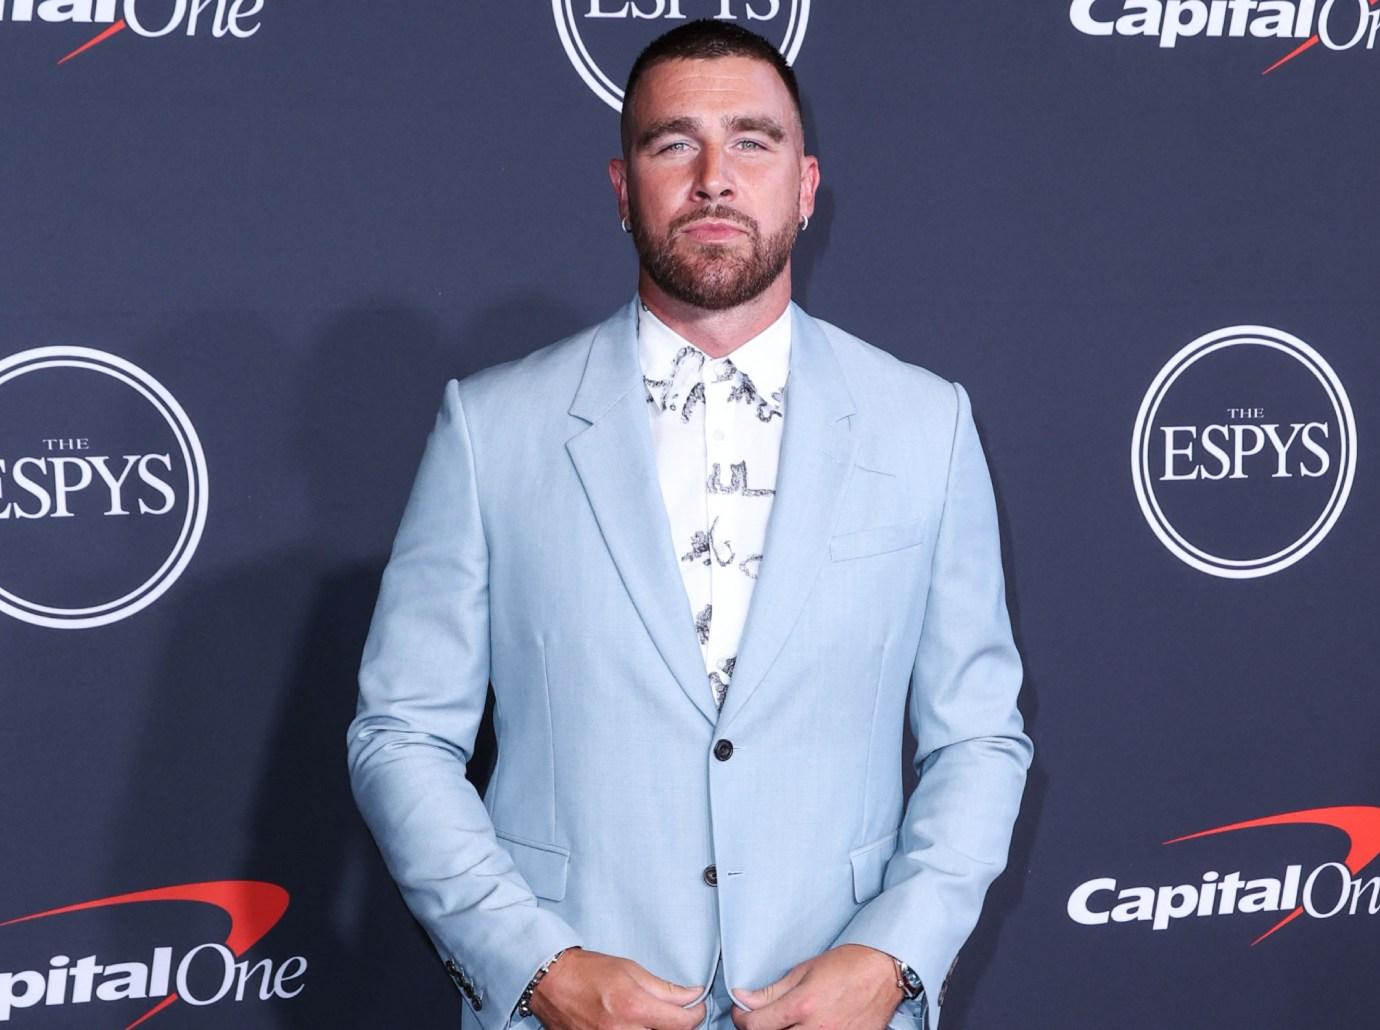 The View' hosts see red flags in Travis Kelce's Taylor Swift interview